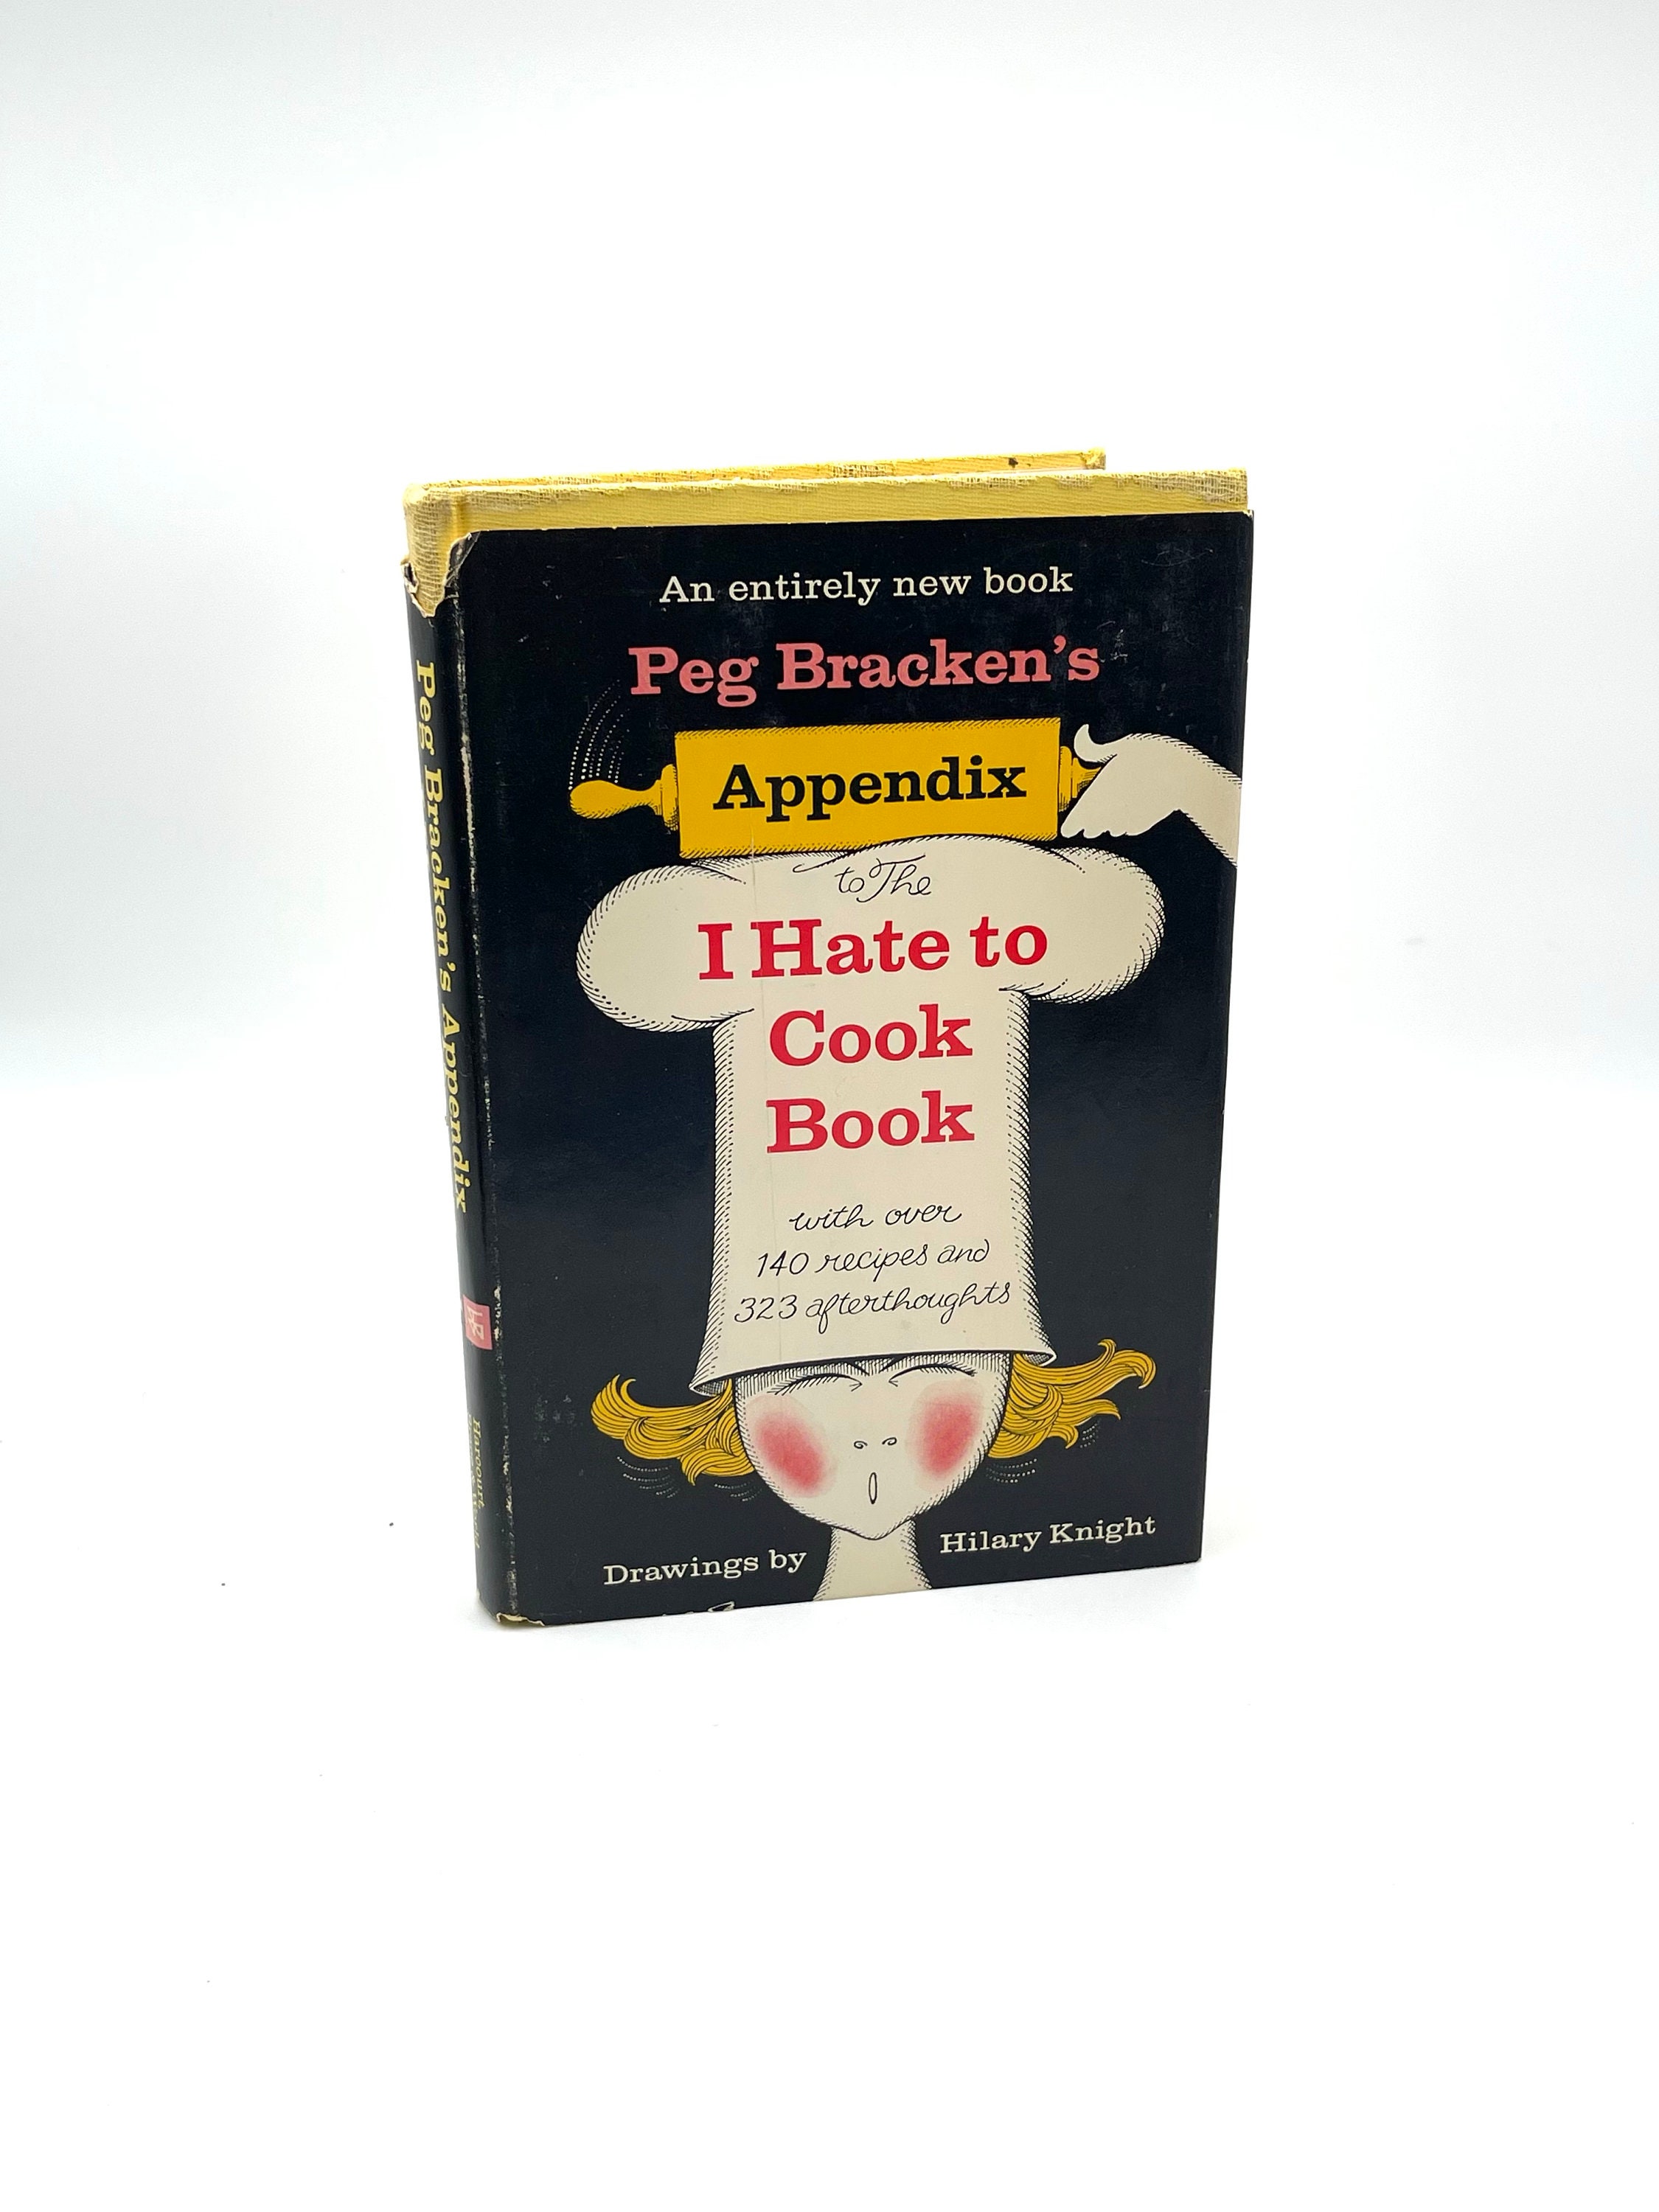 Peg Bracken's, the I Hate to Cook Book, Appendix, First Edition Hardcover  1966 